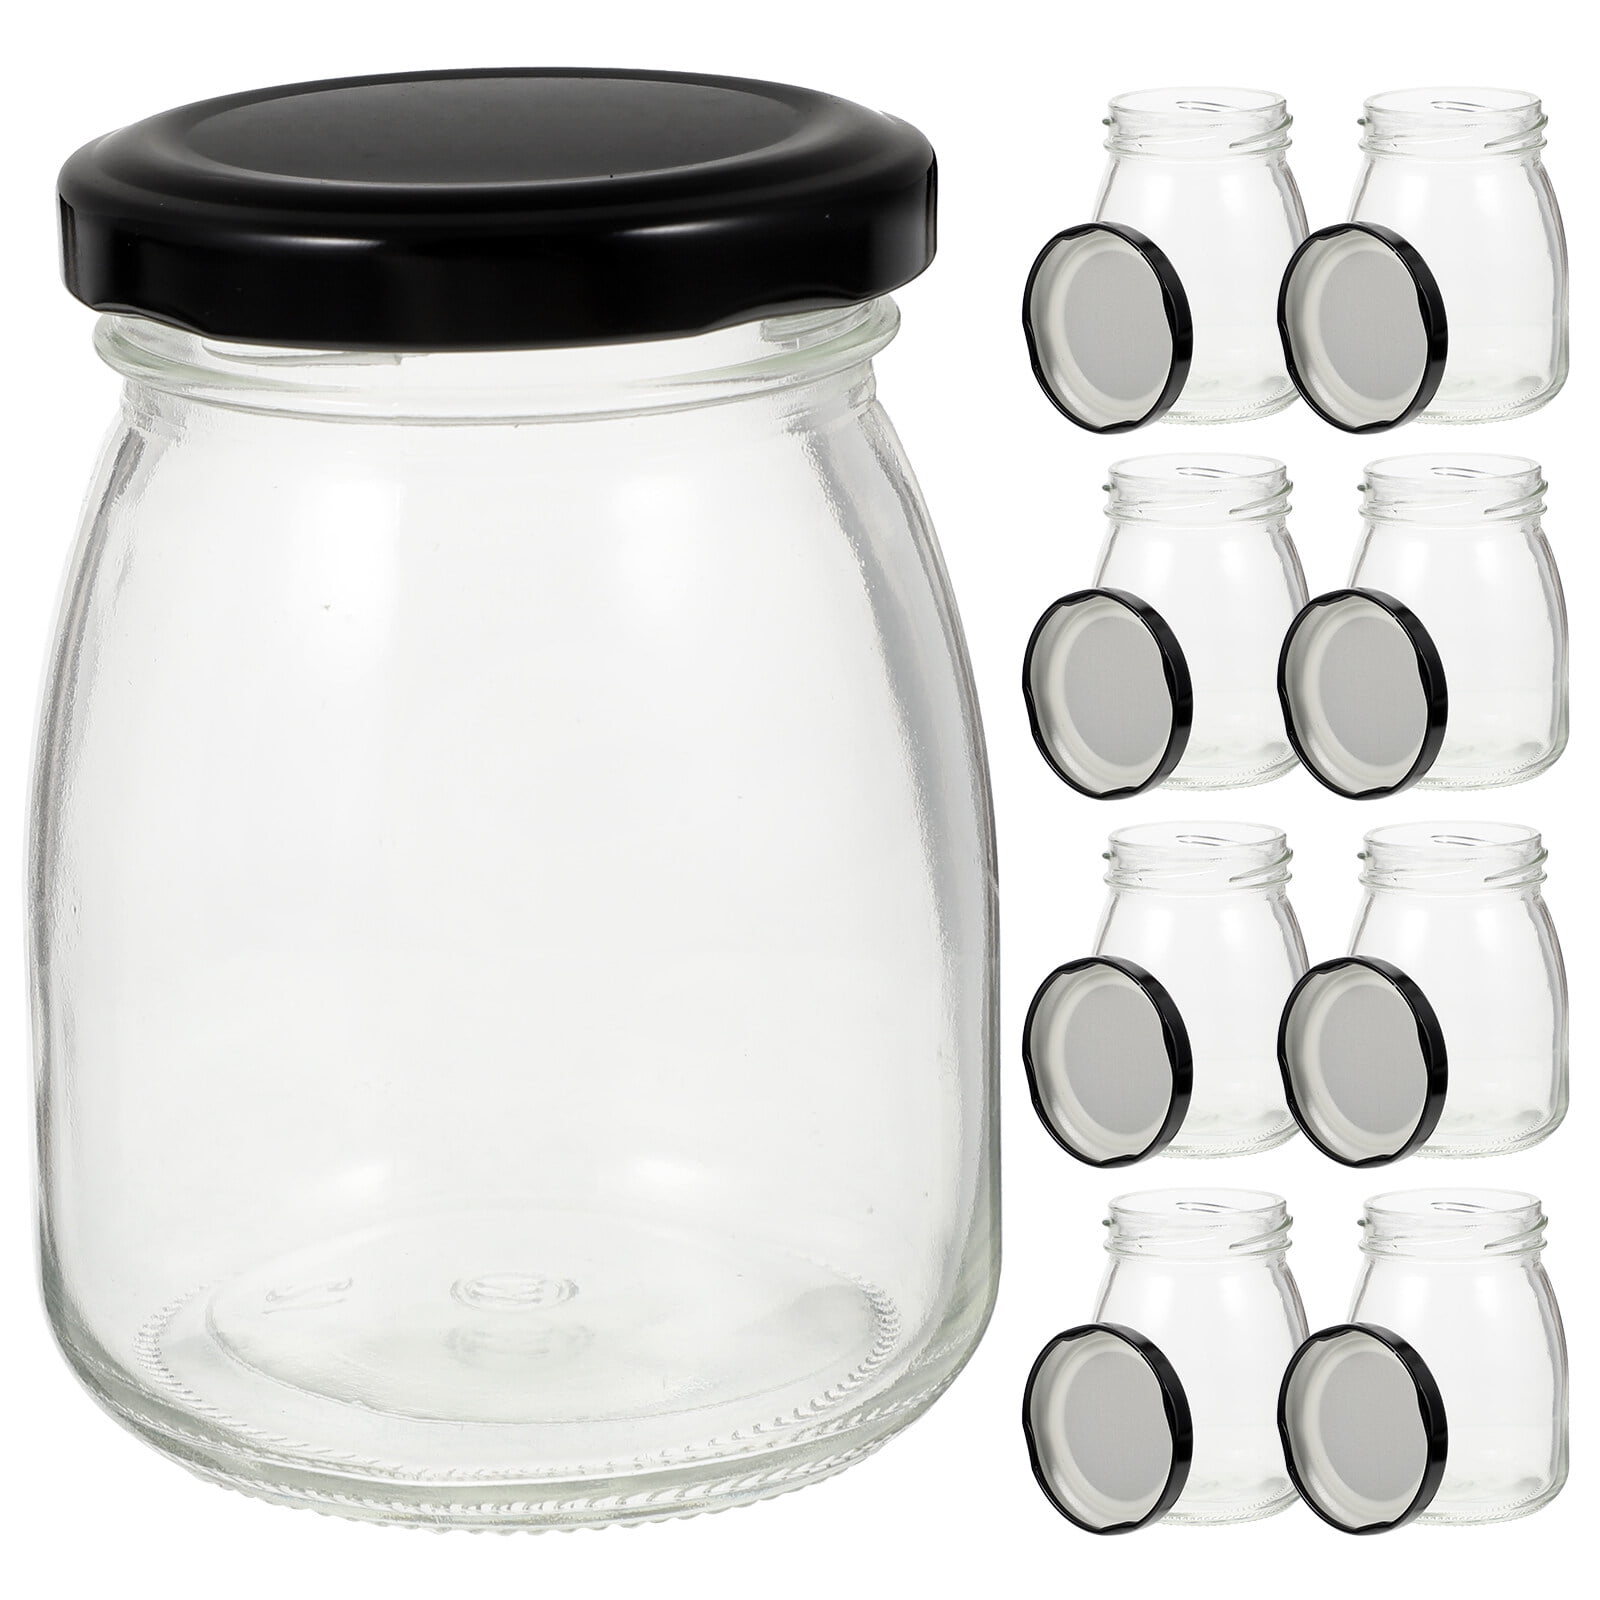 5-oz Glass Jars for Yogurt Milk Parfait and Pudding Perfect for Bakeries